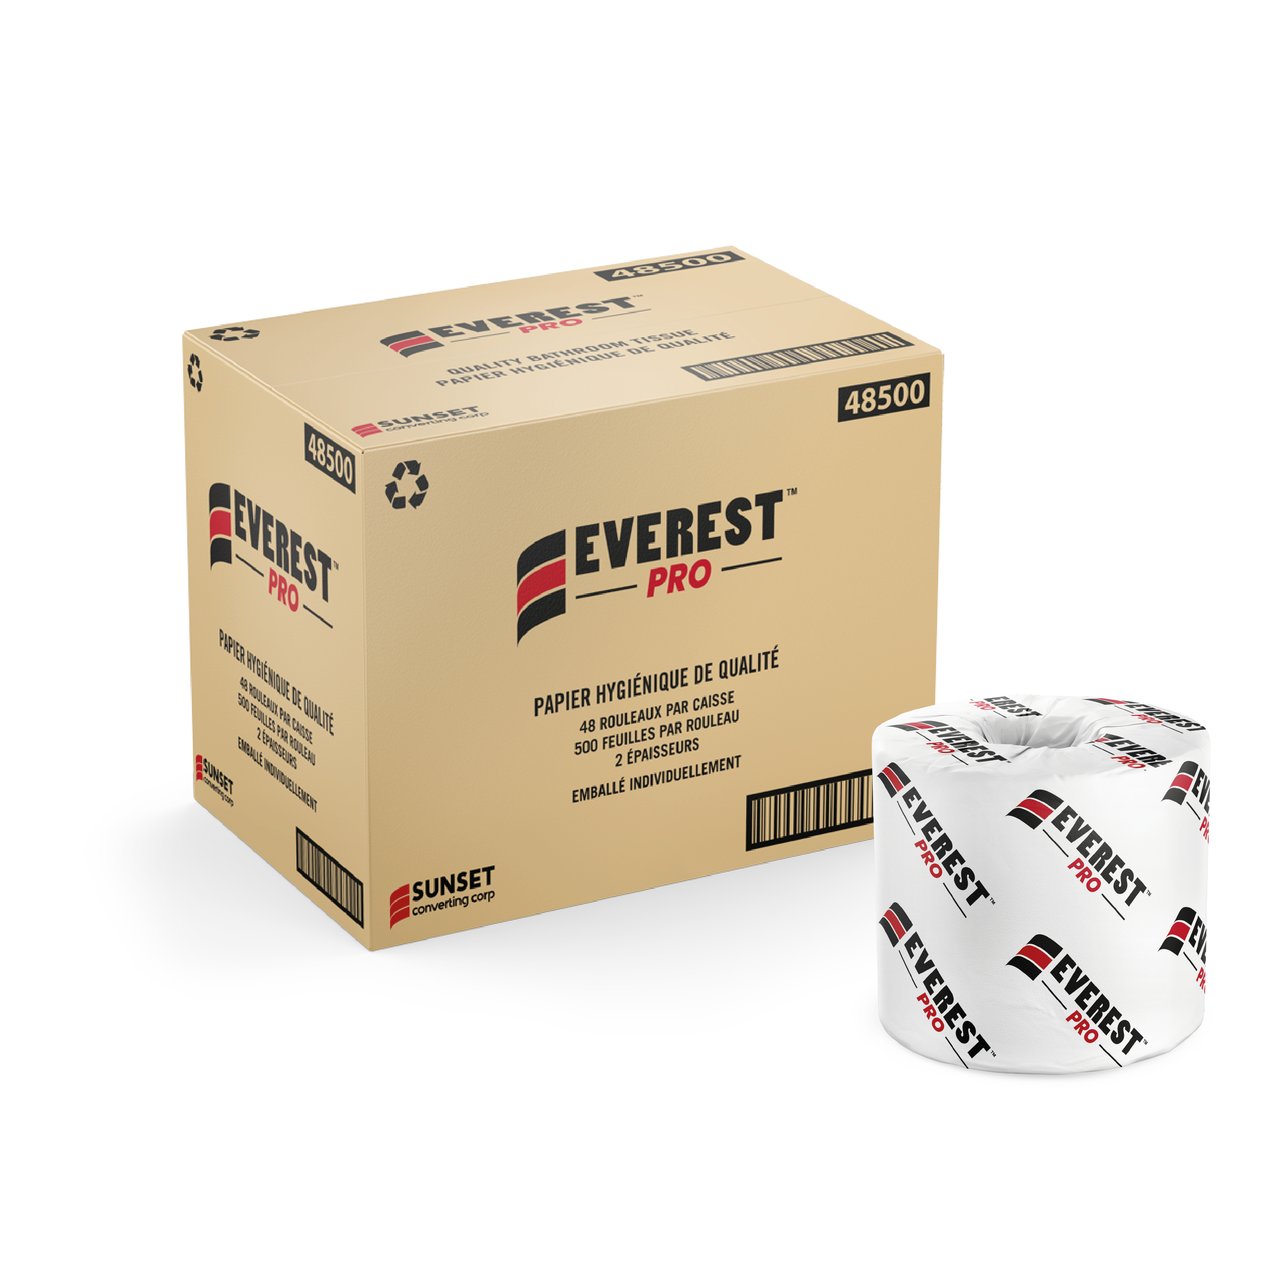 Everest Pro 2 Ply Toilet Tissue 48x500 Sheets